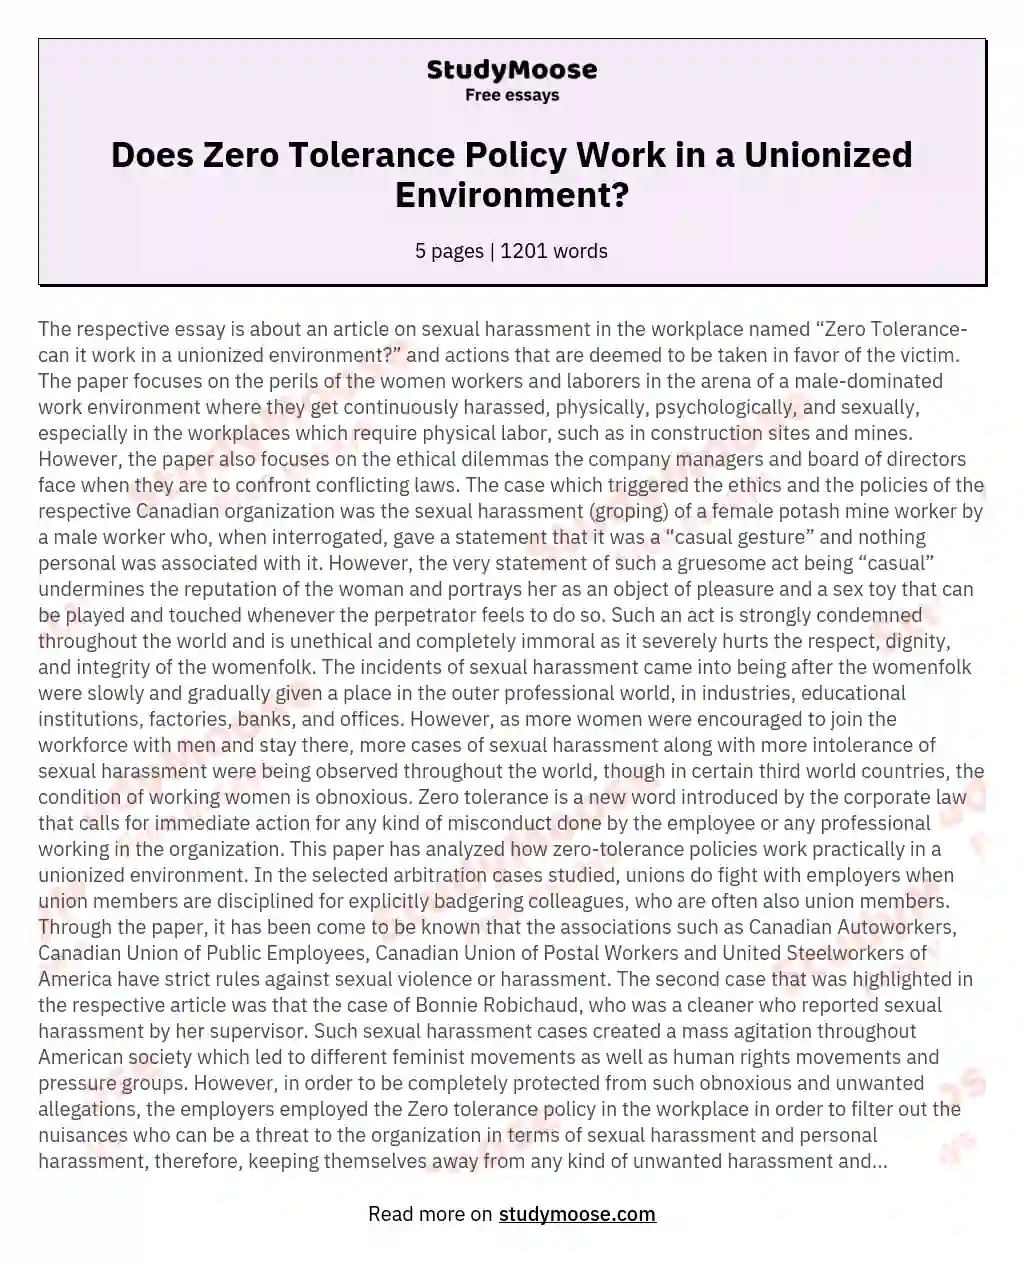 Does Zero Tolerance Policy Work in a Unionized Environment? essay